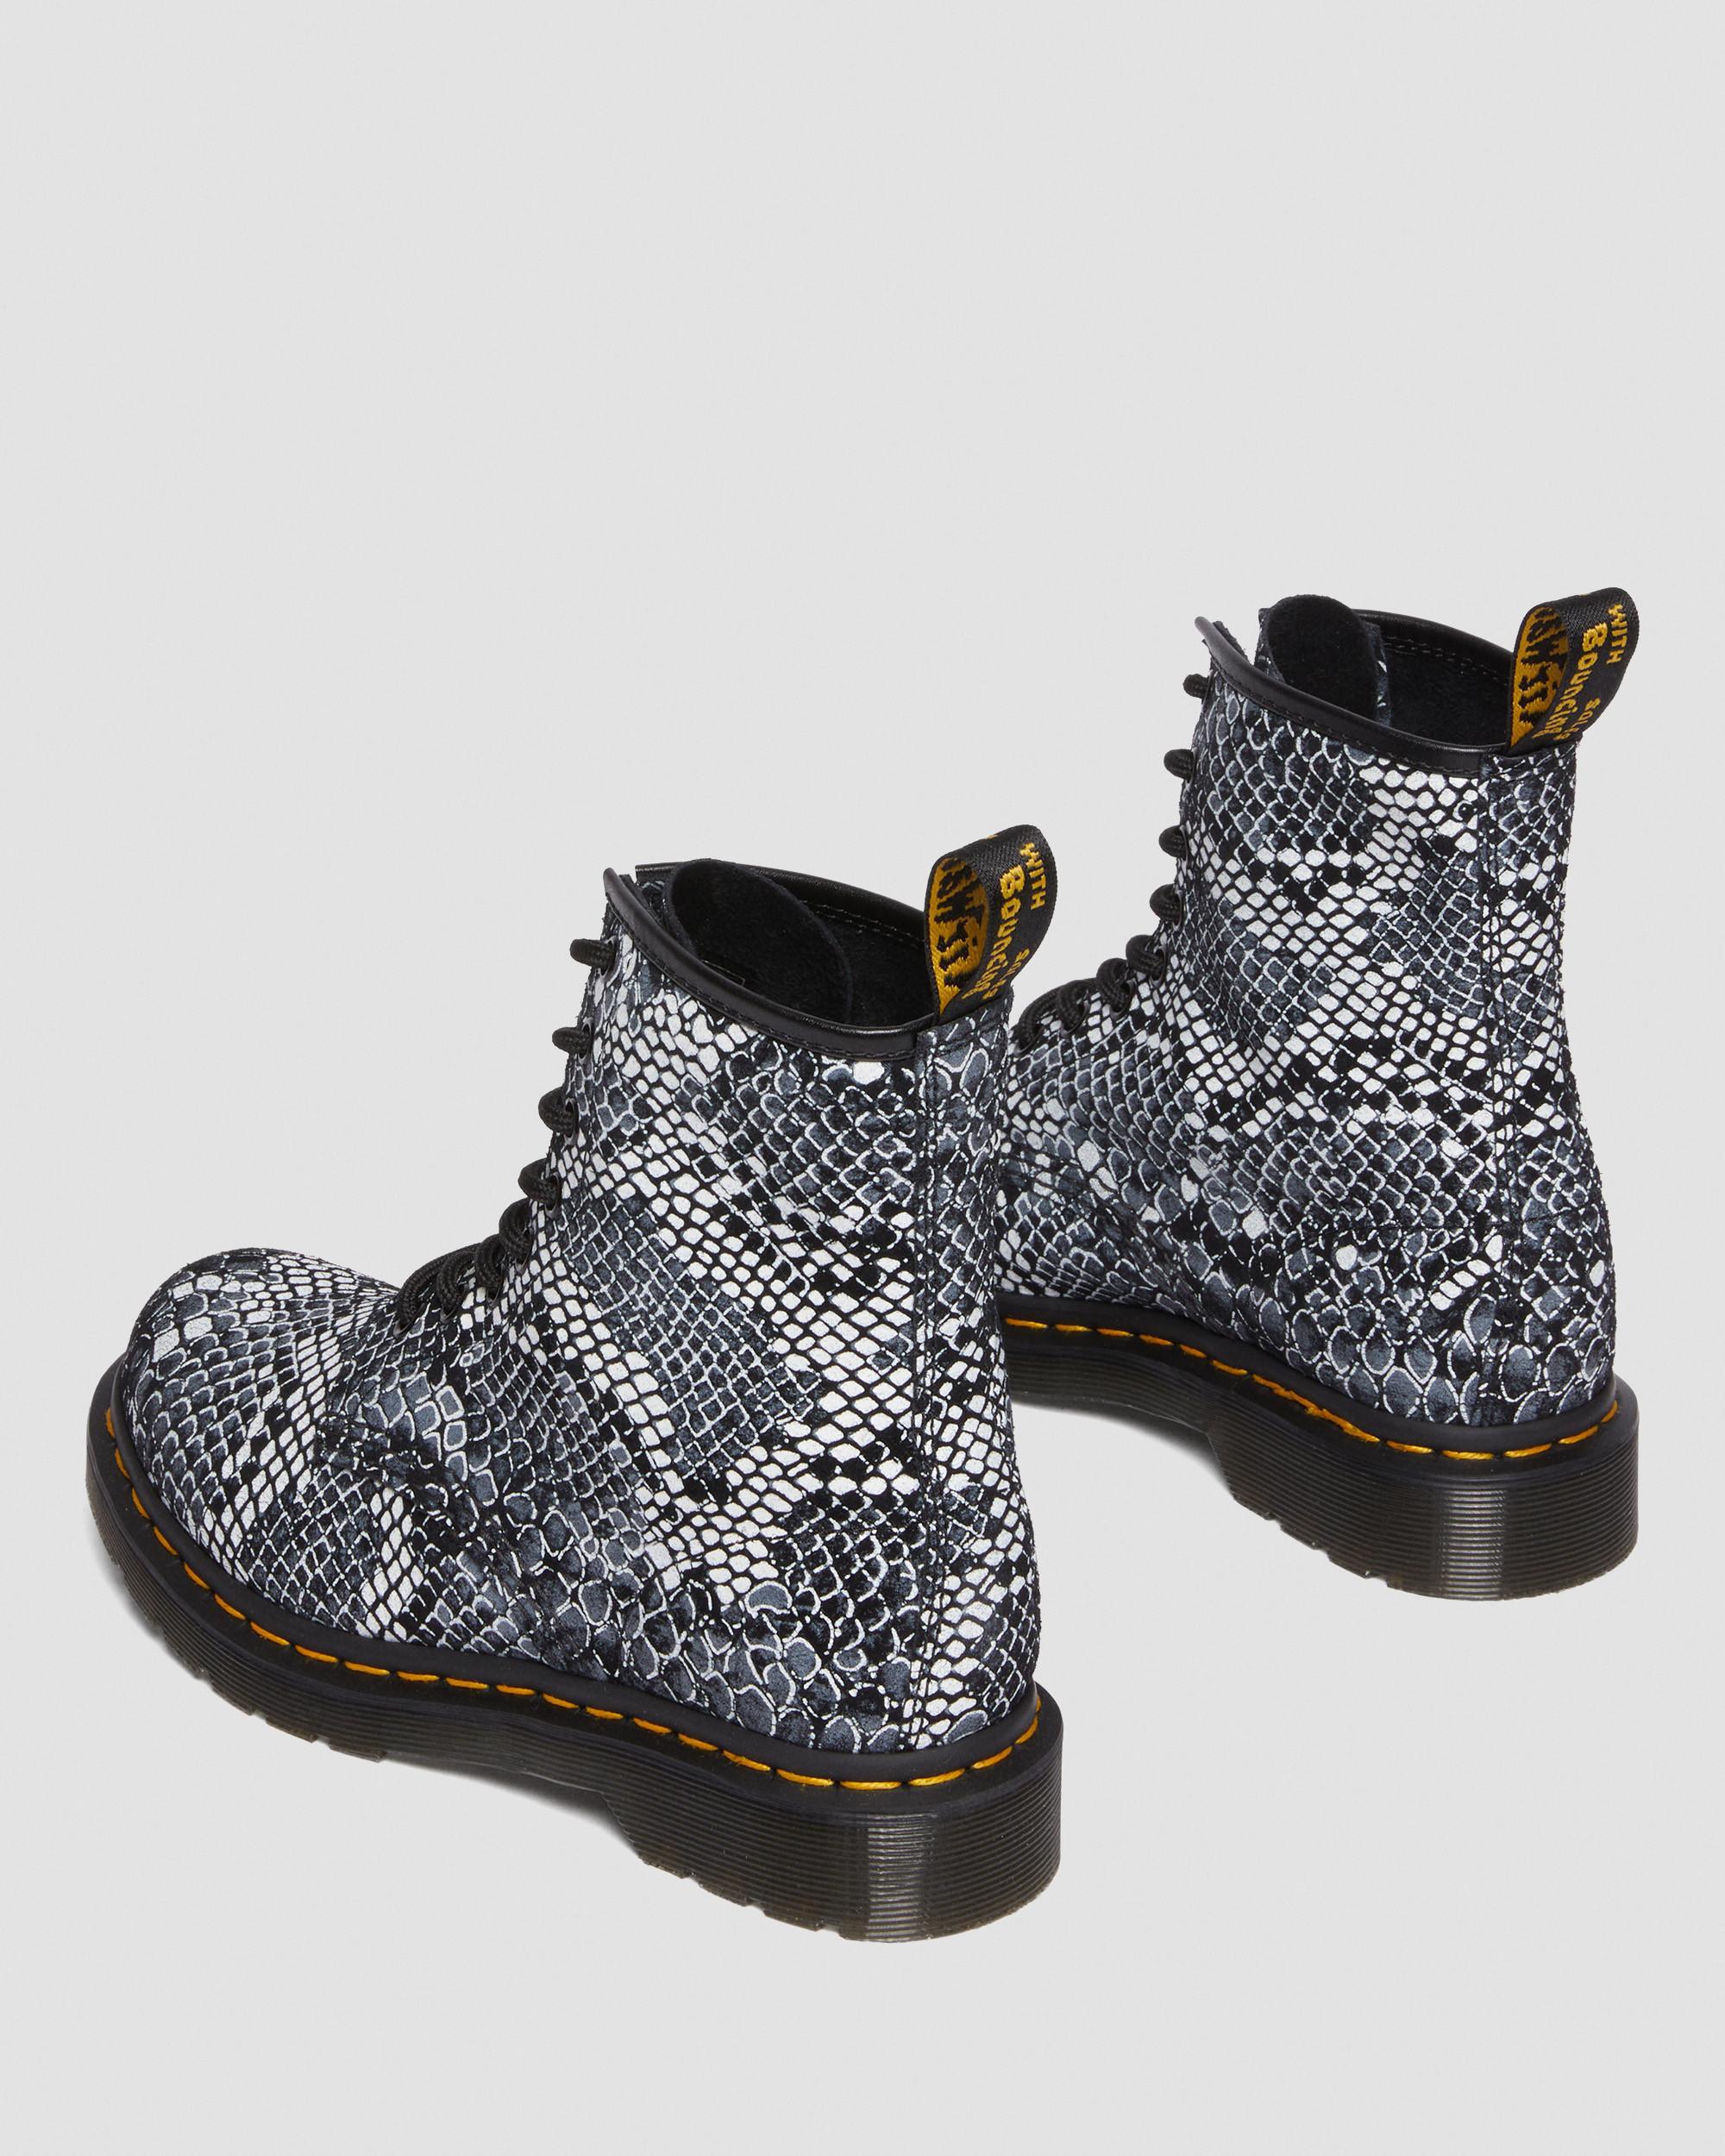 Dr. Martens 1460 Snake Print Leather Lace Up Boots in Black | Lyst